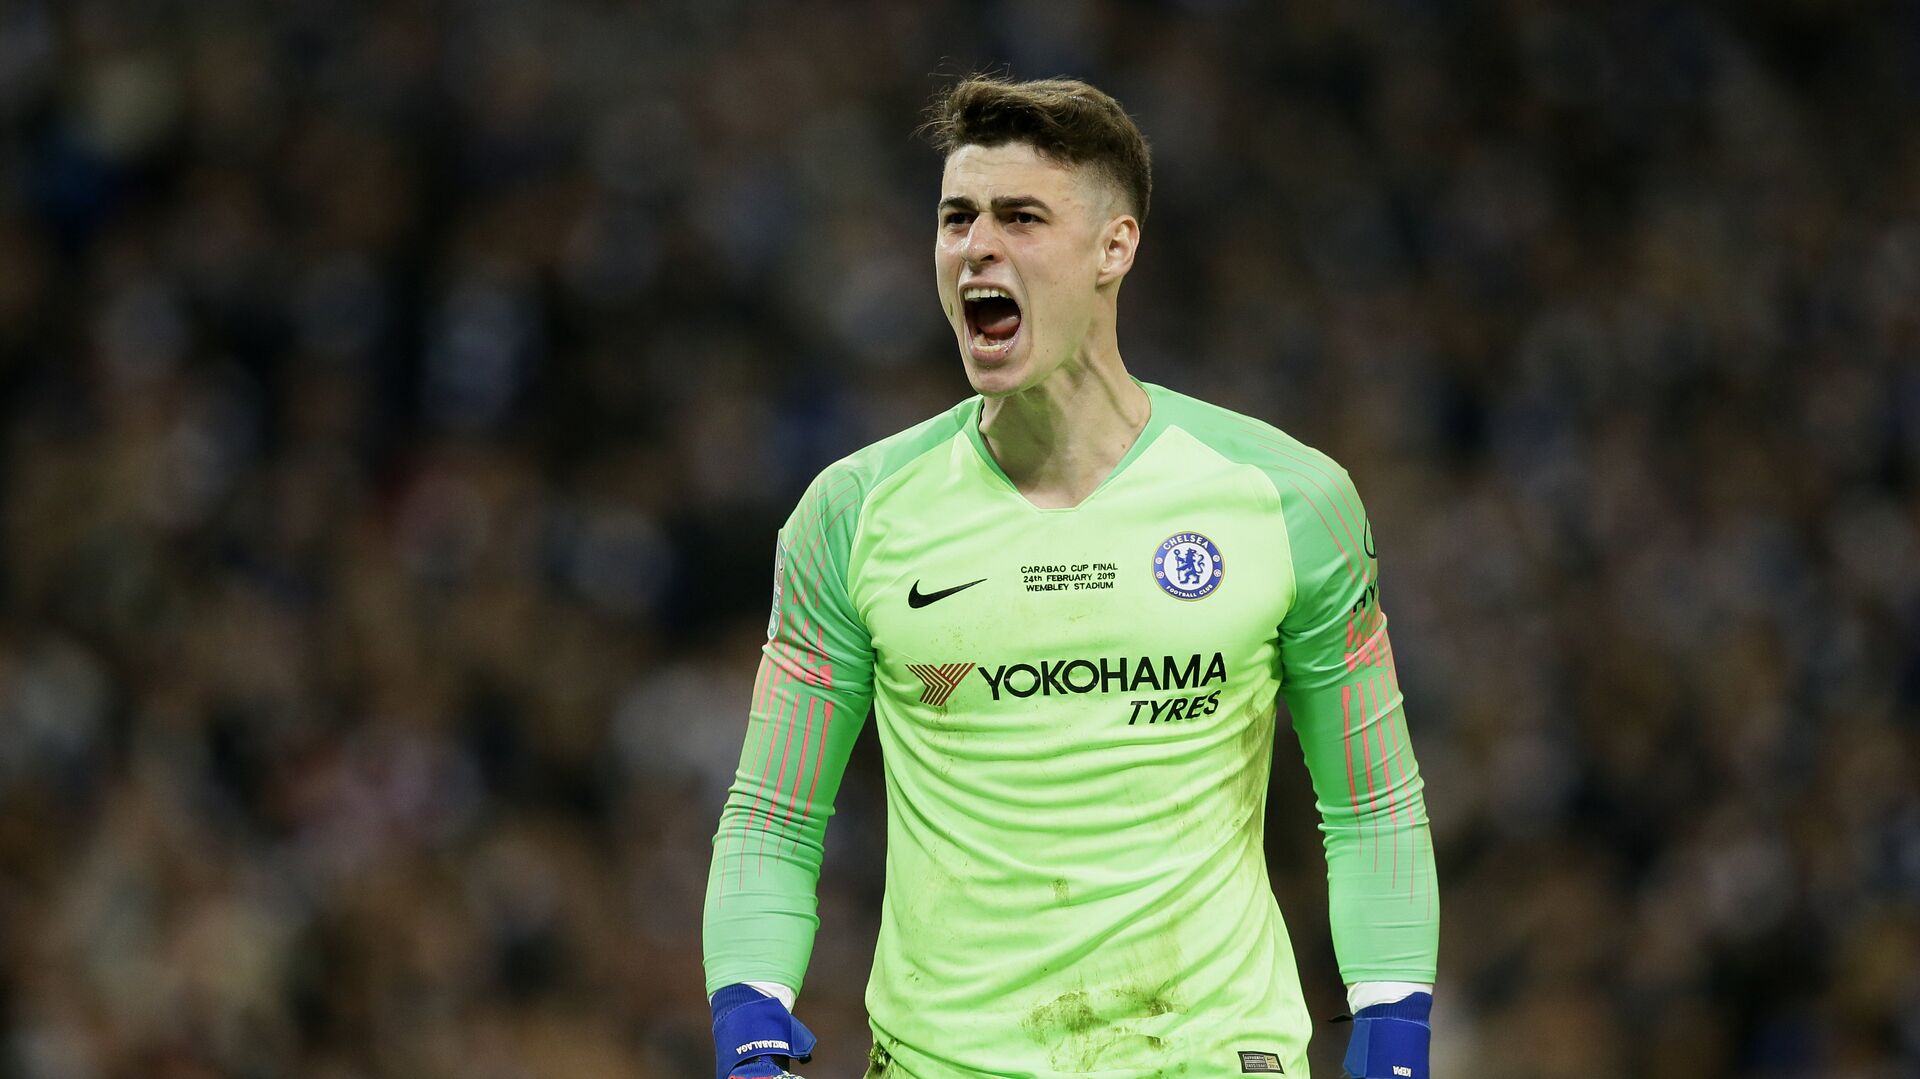 Chelsea's goalkeeper Kepa Arrizabalaga screams at the bench after refusing to be substituted at Wembley on 24 February 2019 - اسپوتنیک افغانستان  , 1920, 25.07.2022